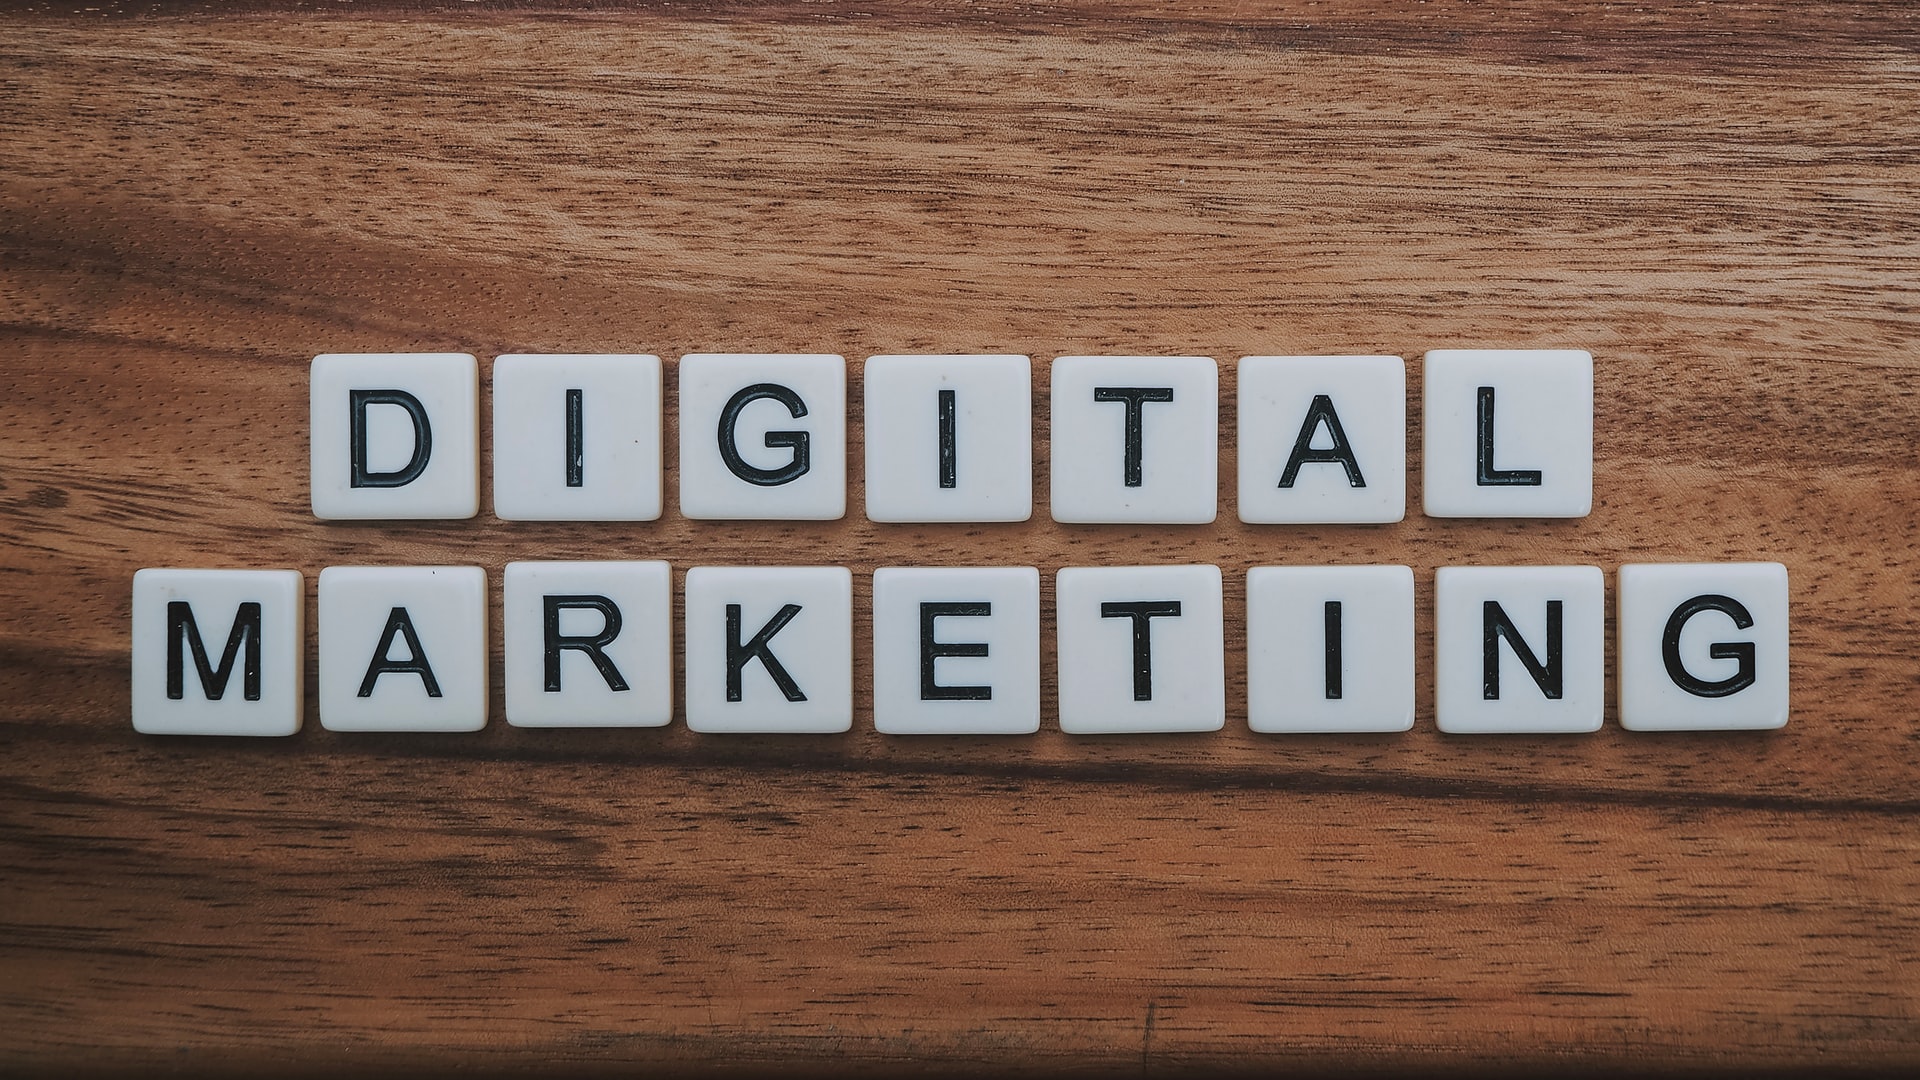 Looking to enhance your marketing plan this year? We discuss 97 digital marketing statistics to help guide your innovative strategies towards more business. 